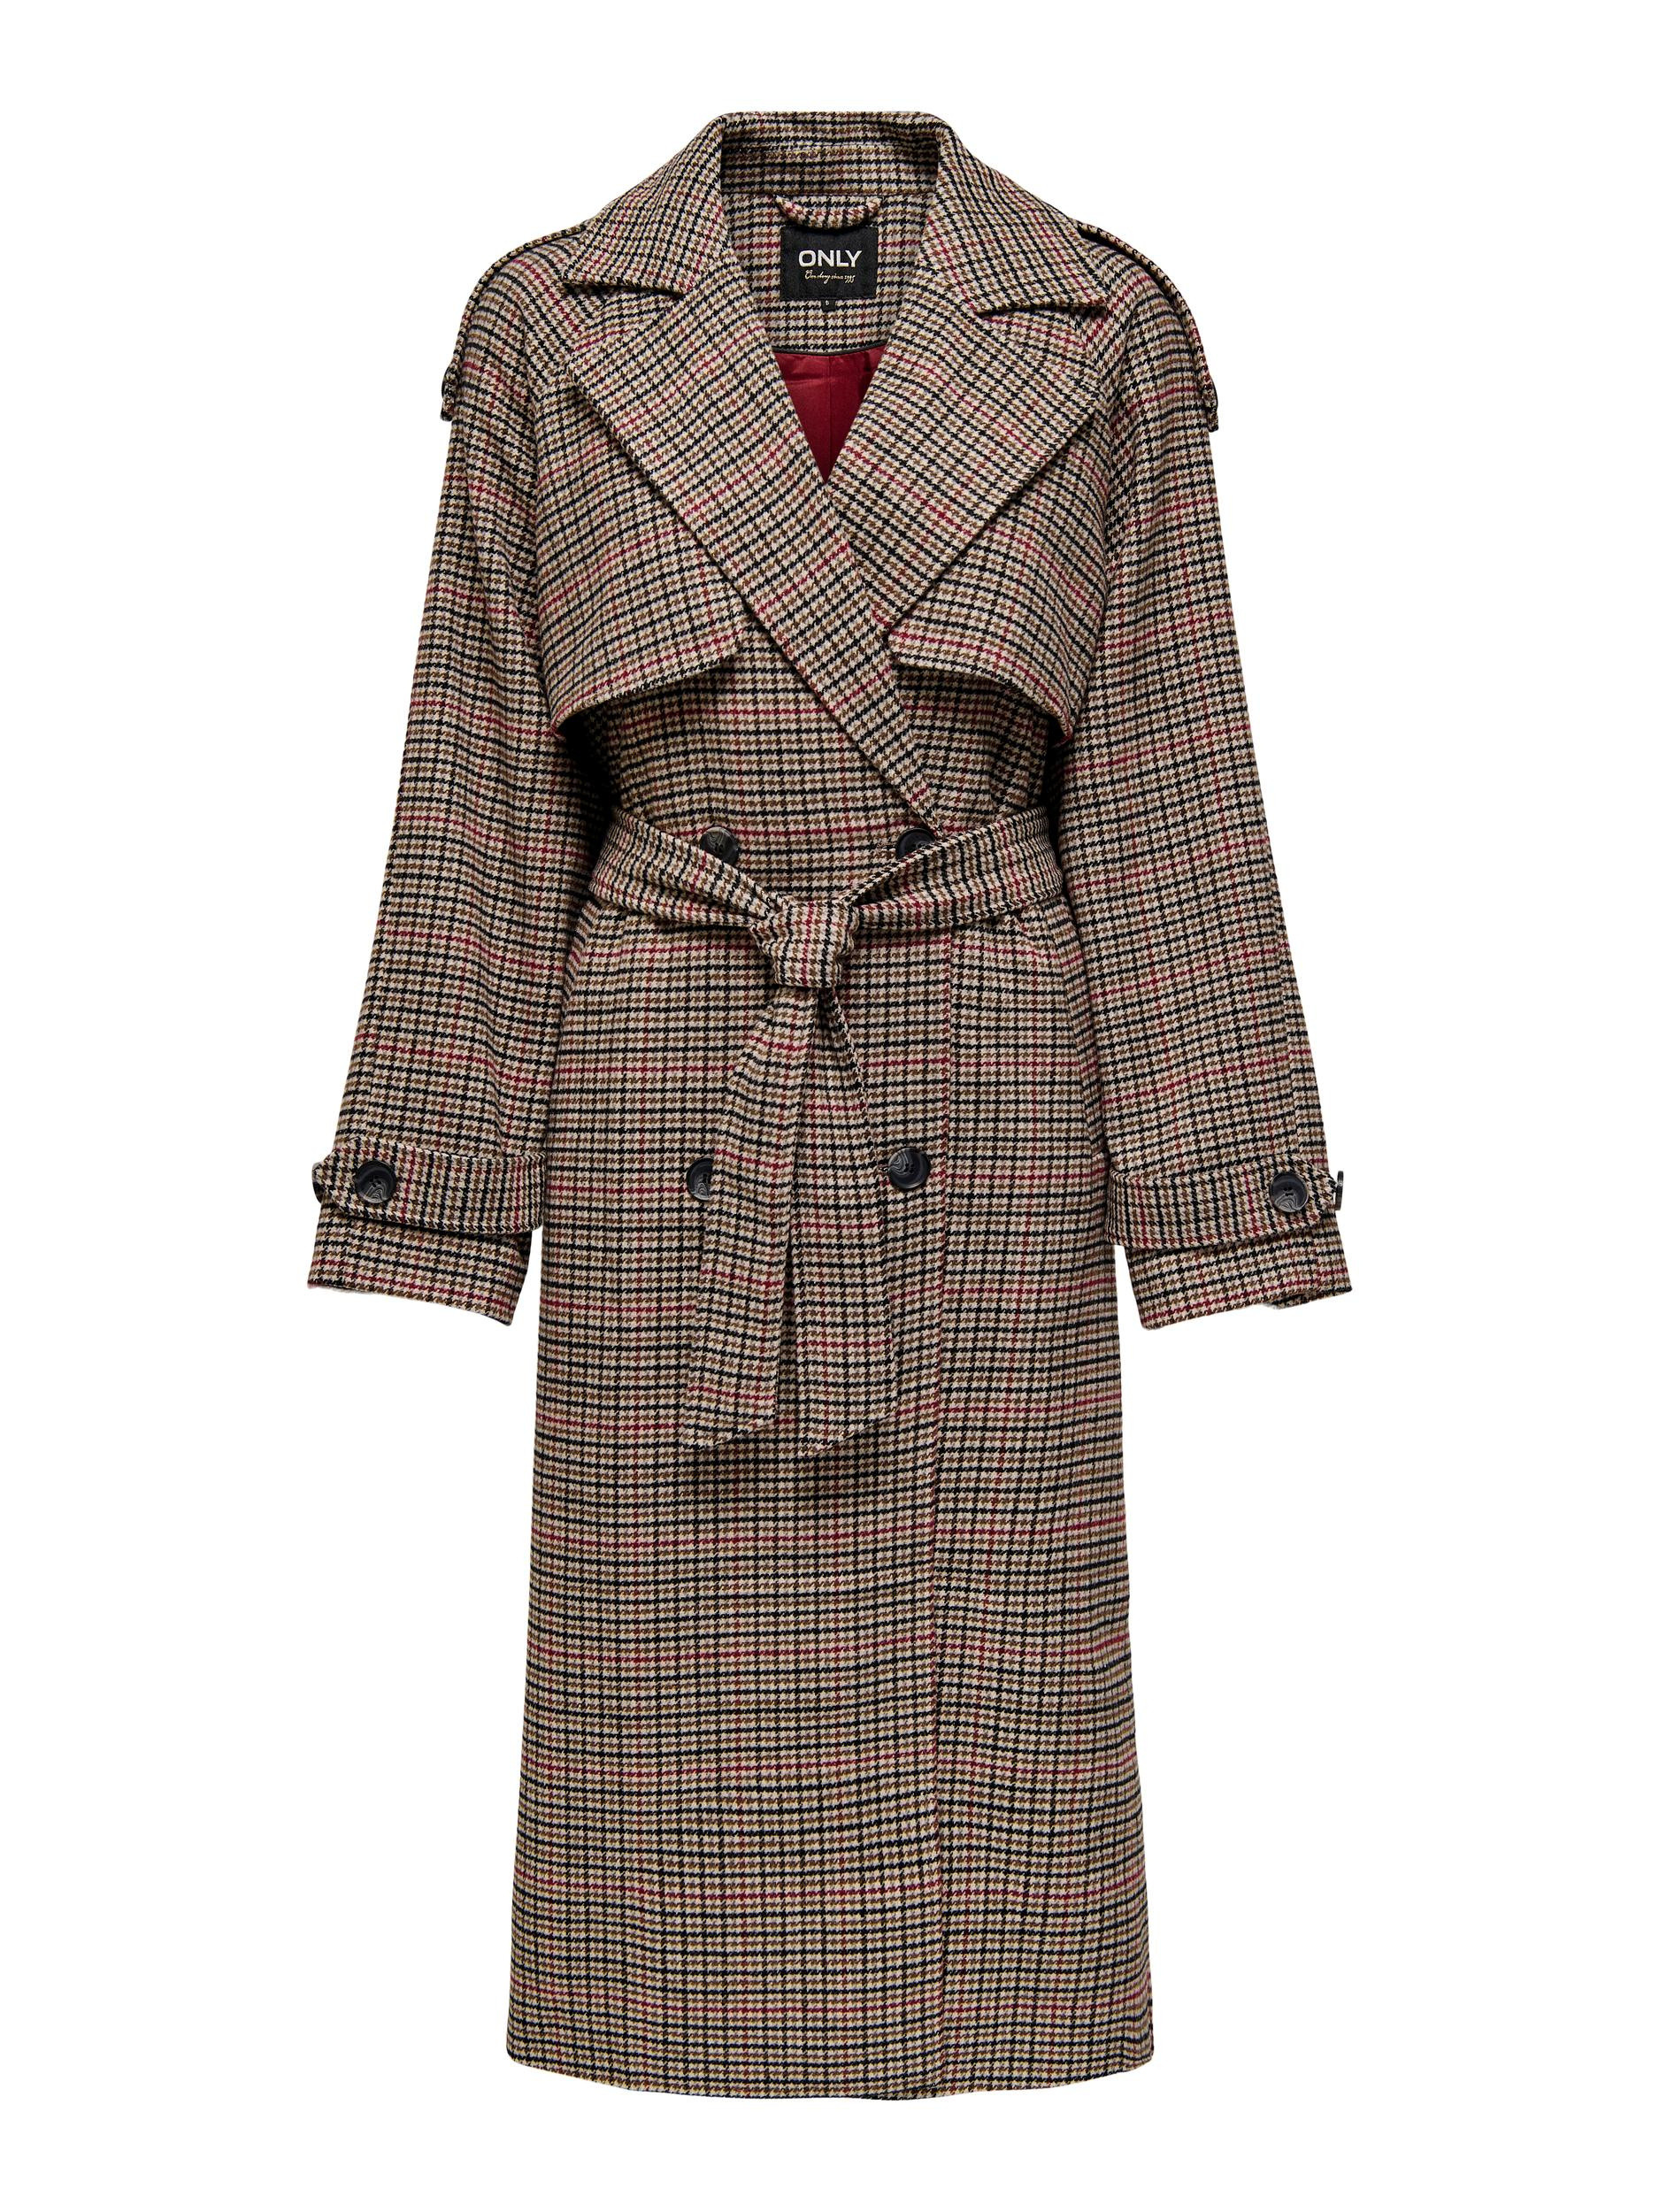 Only - Checked trench coat, Light Brown, large image number 0